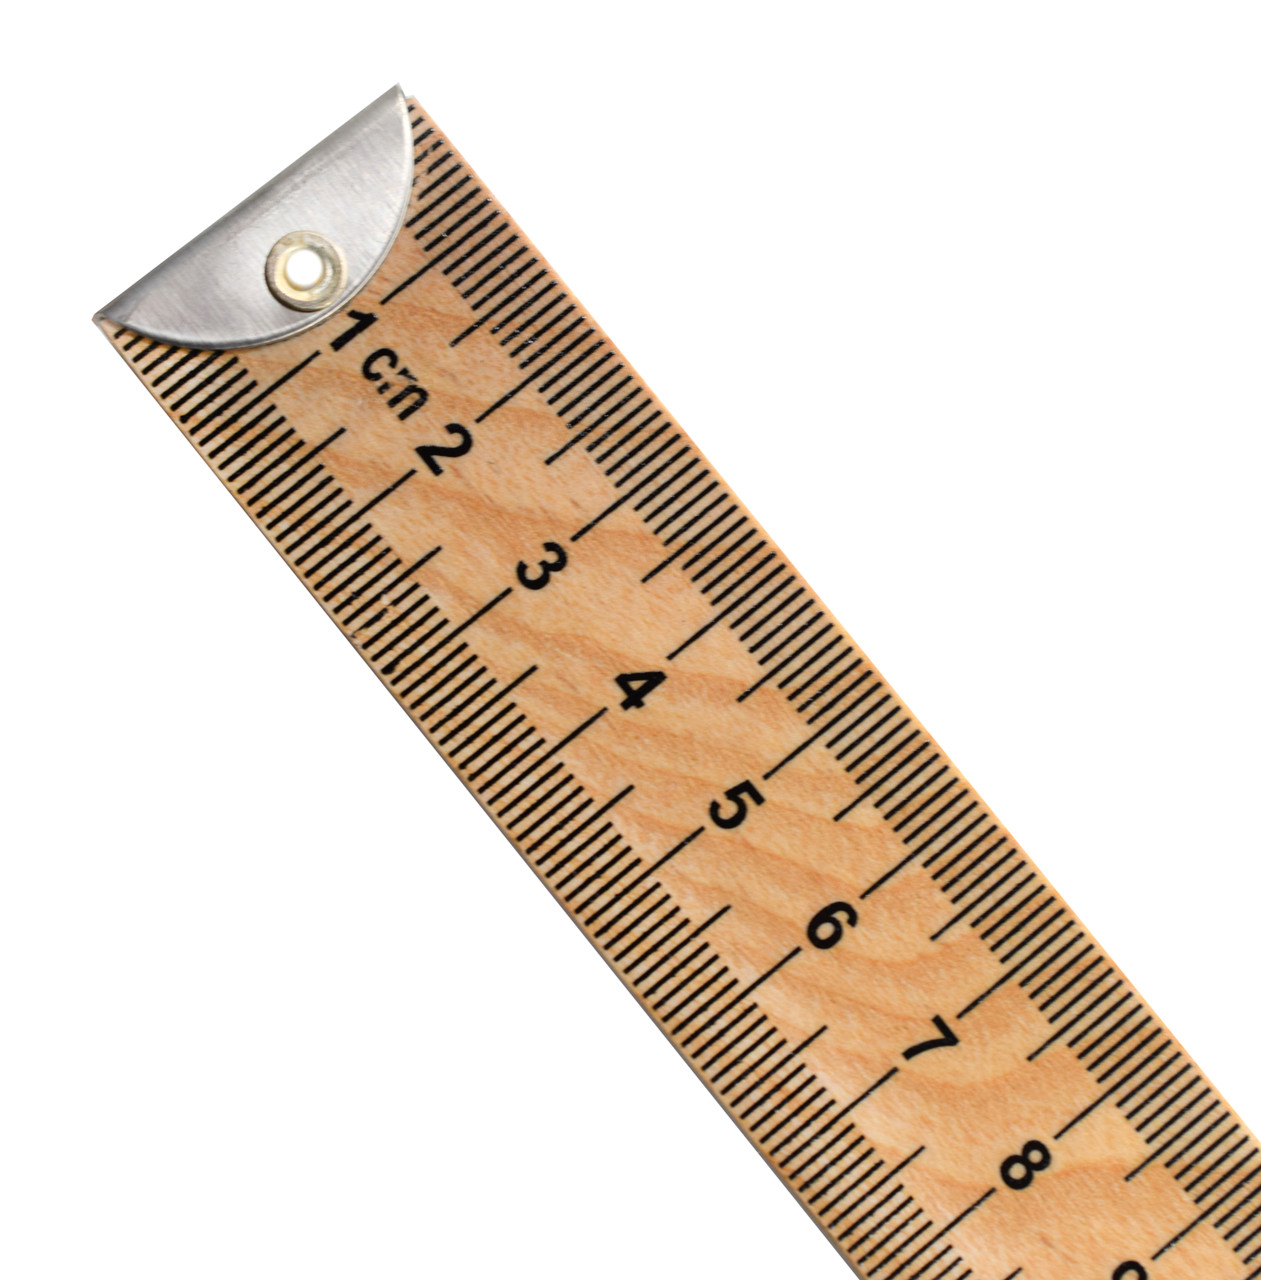 Learning Resources Wooden Meter Stick Plain Ends 3/Pack (STP34039-3)